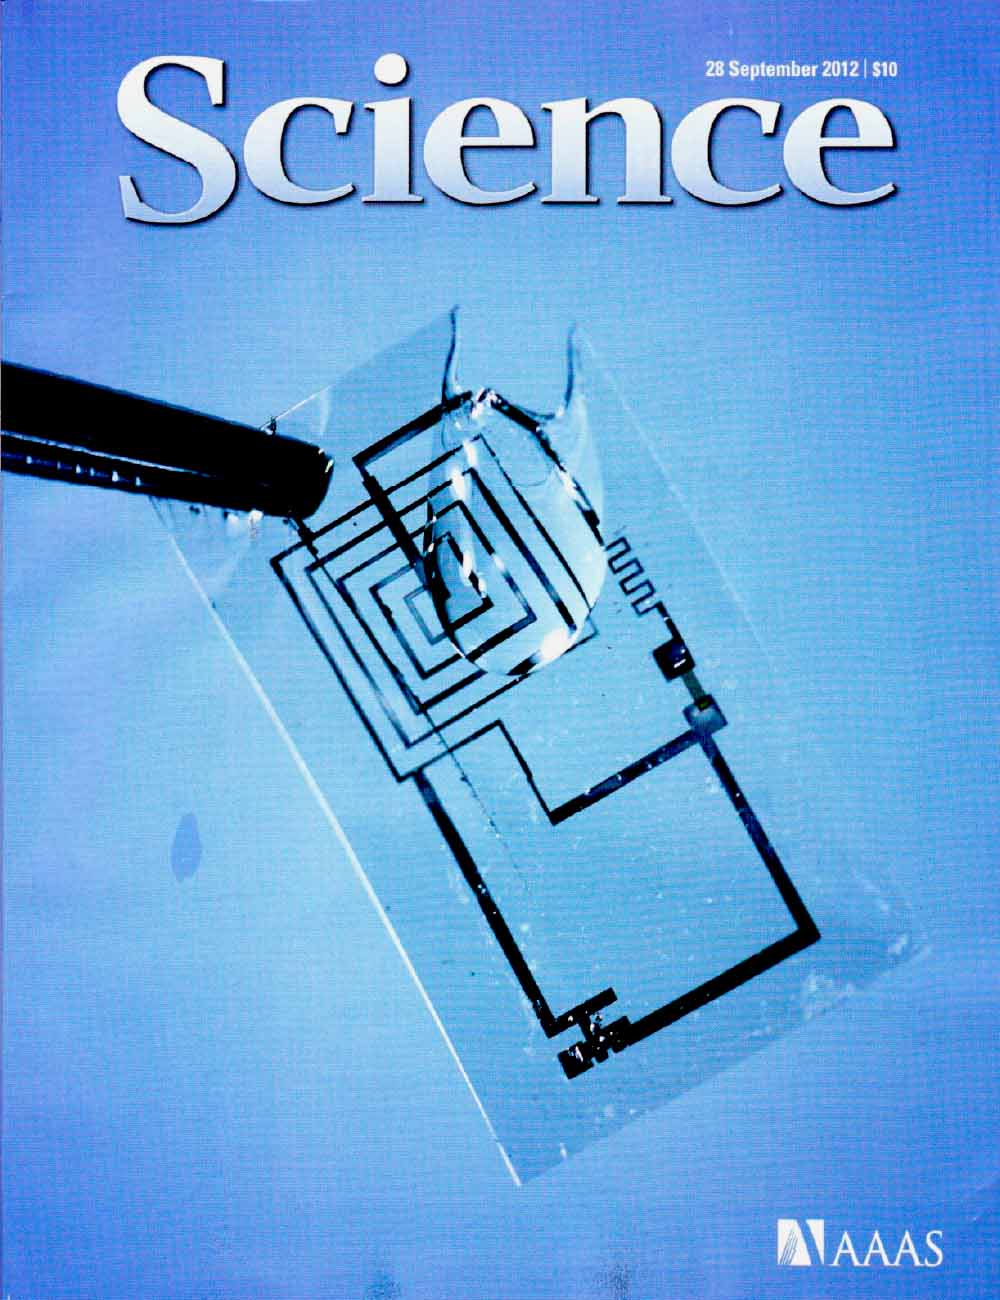 2012 Cover of Science, Volume 337, Issue 6102